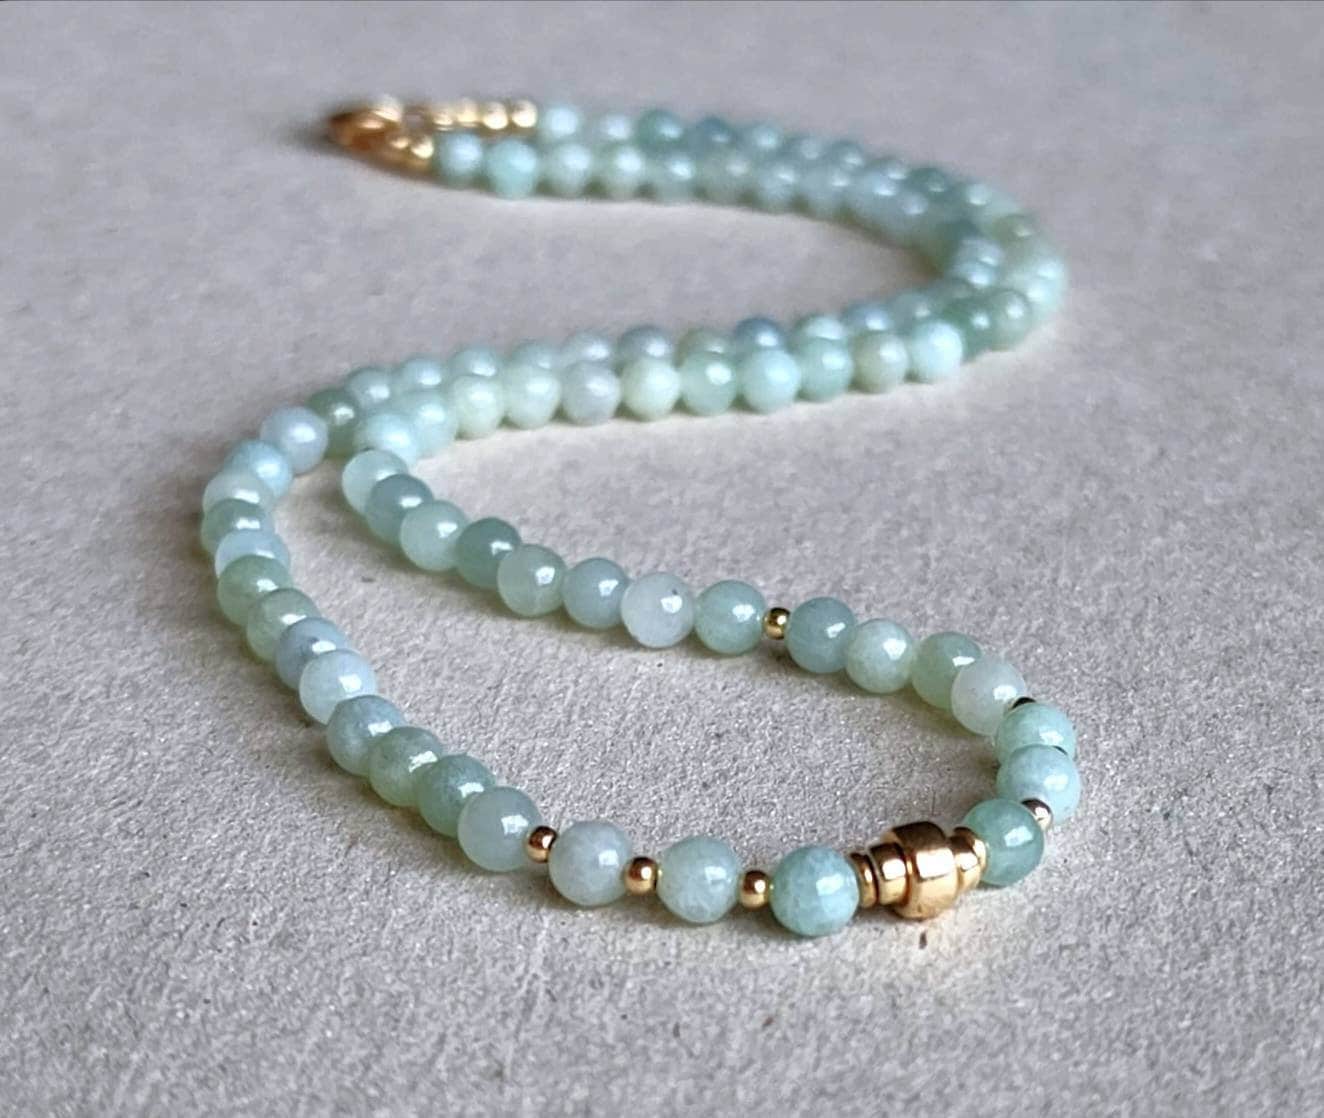 Jade Bead Necklace in 18K White Gold